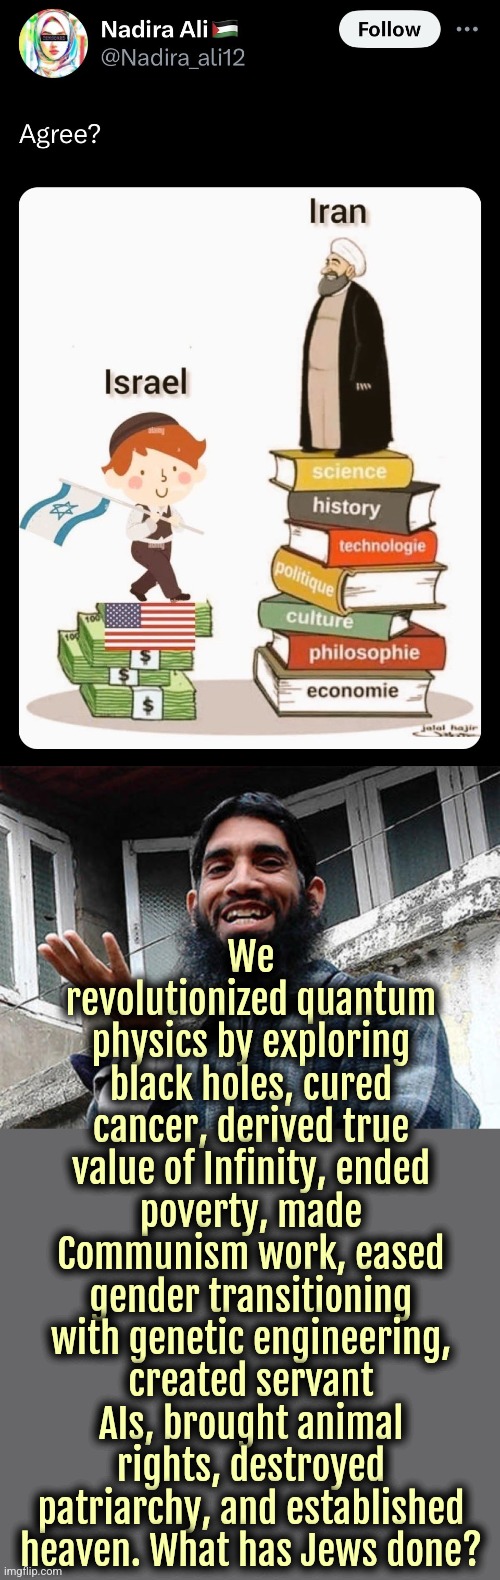 Long Live Supreme Leader Khamenei. #ShariaSupremacy #ZionistAreLosers | We revolutionized quantum physics by exploring black holes, cured cancer, derived true value of Infinity, ended poverty, made Communism work, eased gender transitioning with genetic engineering, created servant AIs, brought animal rights, destroyed patriarchy, and established heaven. What has Jews done? | image tagged in islam,jews,israel,iran,palestine,lgbt | made w/ Imgflip meme maker